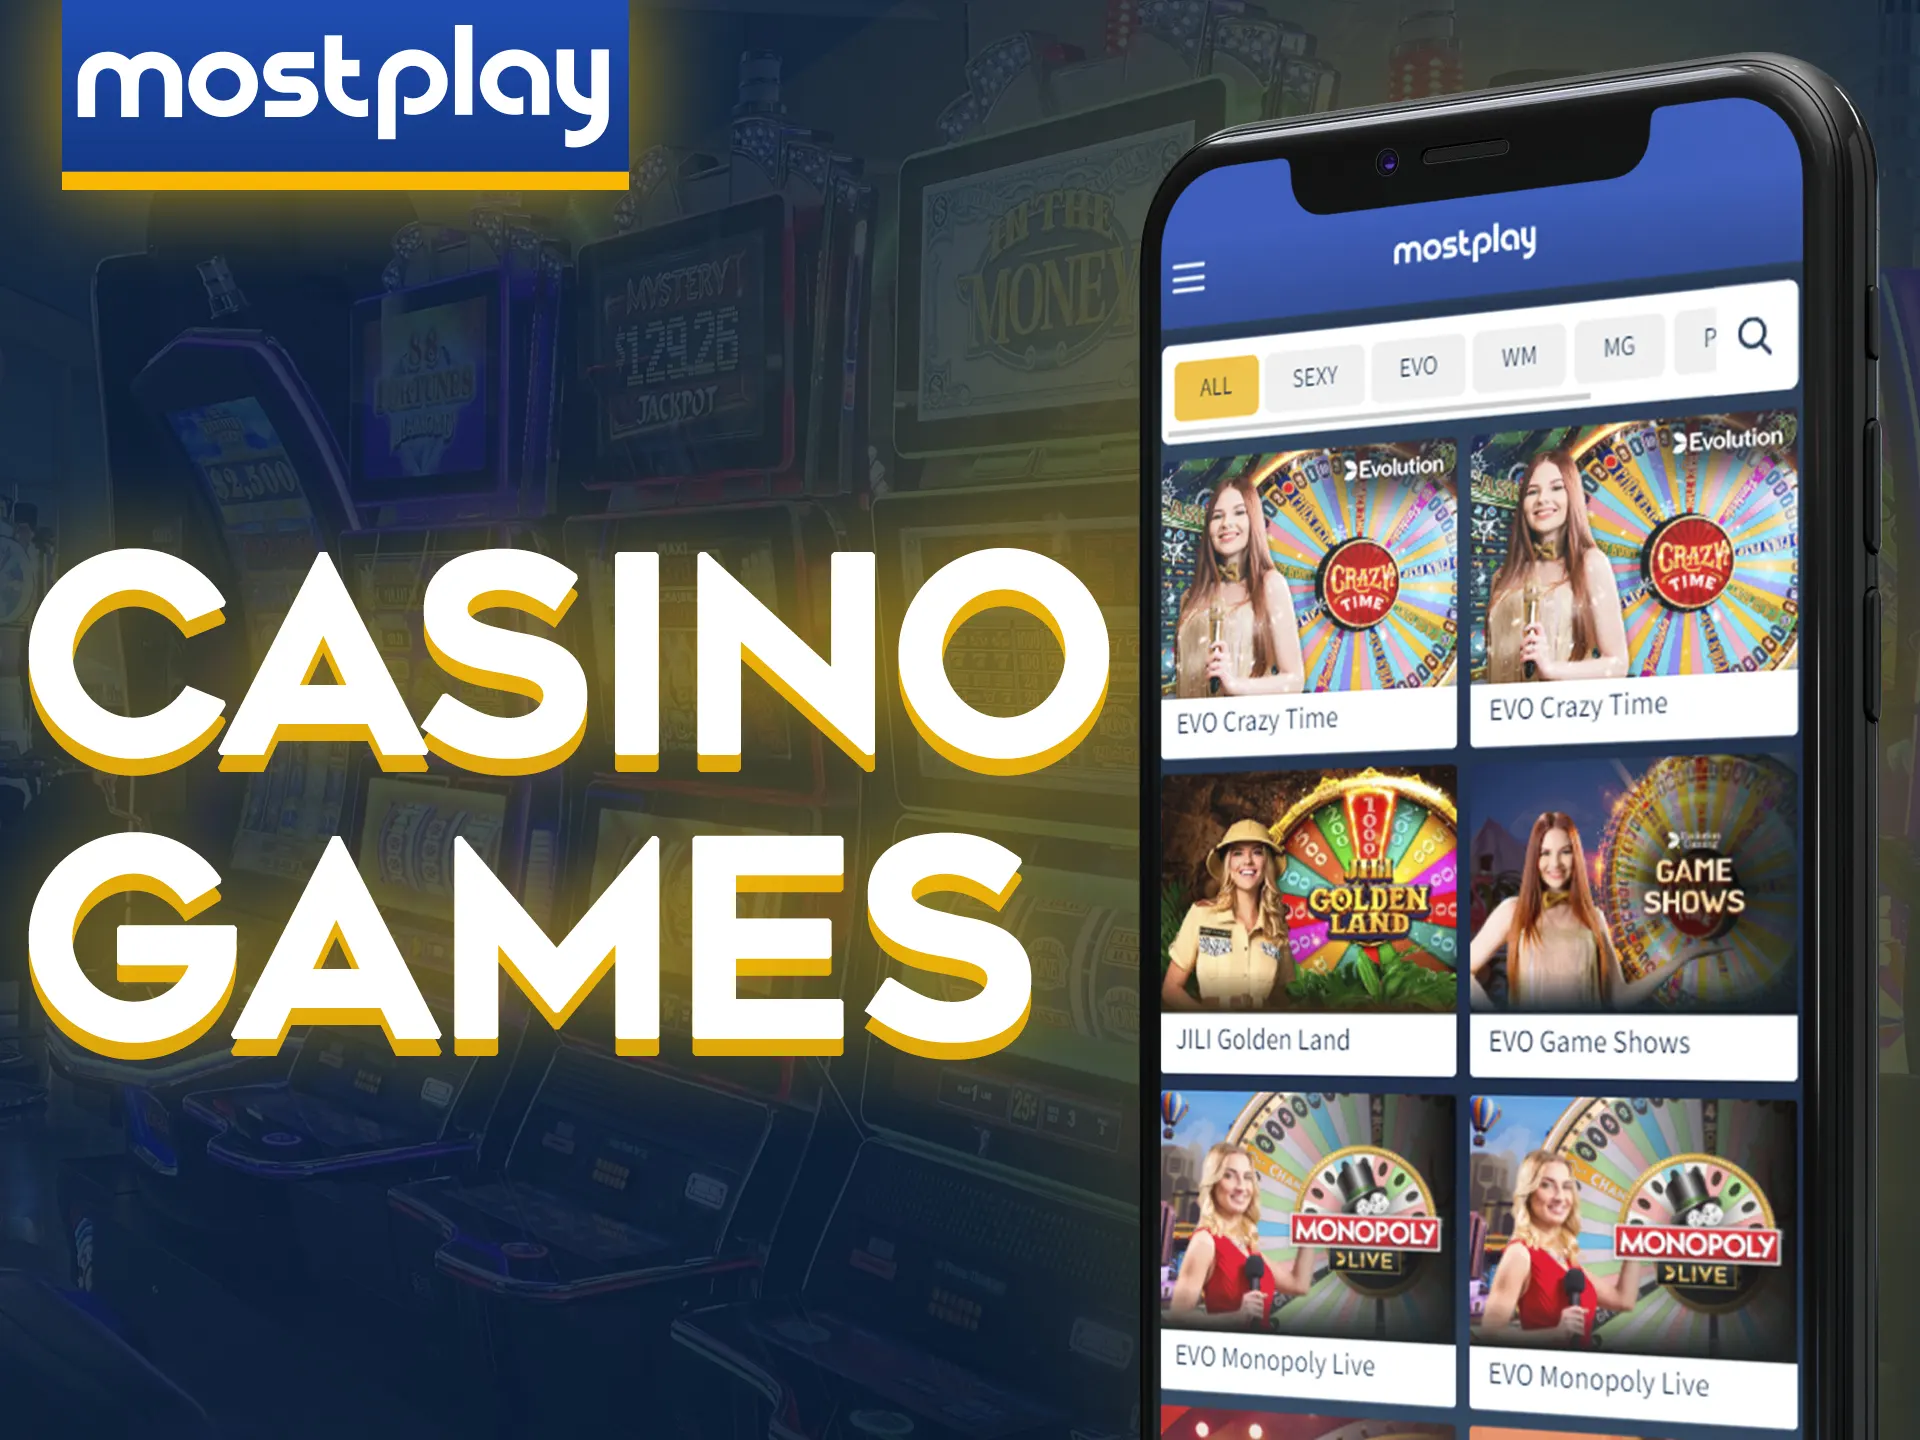 Search for your favorite Mostplay casino games in the app.